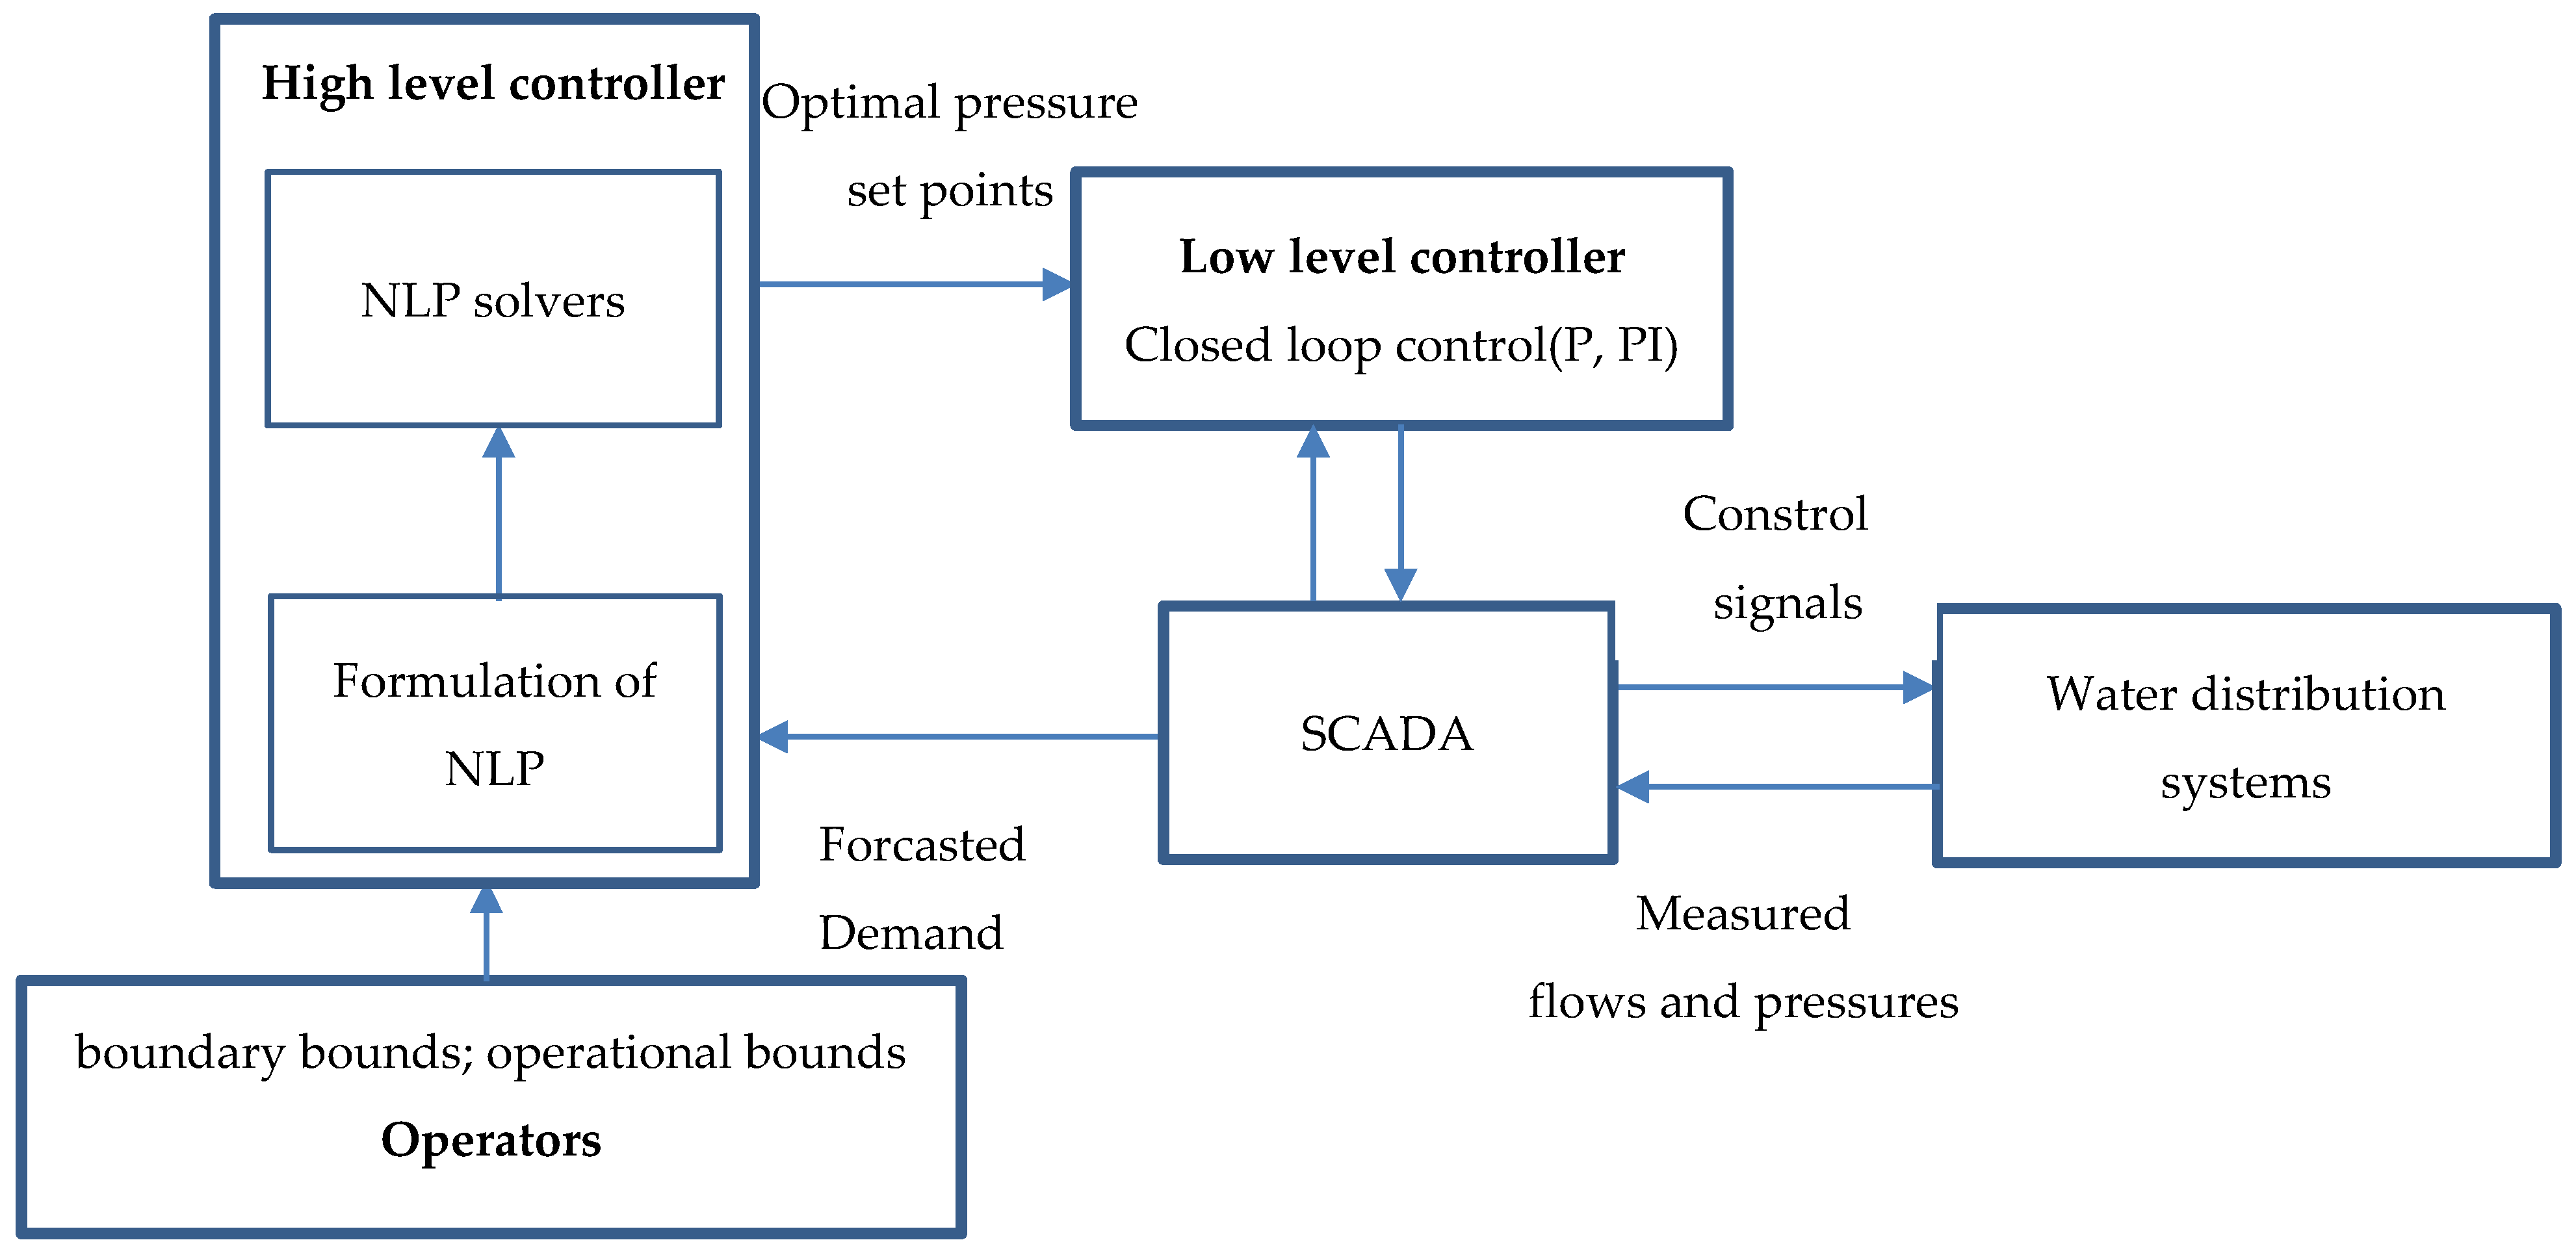 https://www.mdpi.com/water/water-13-00825/article_deploy/html/images/water-13-00825-g001.png